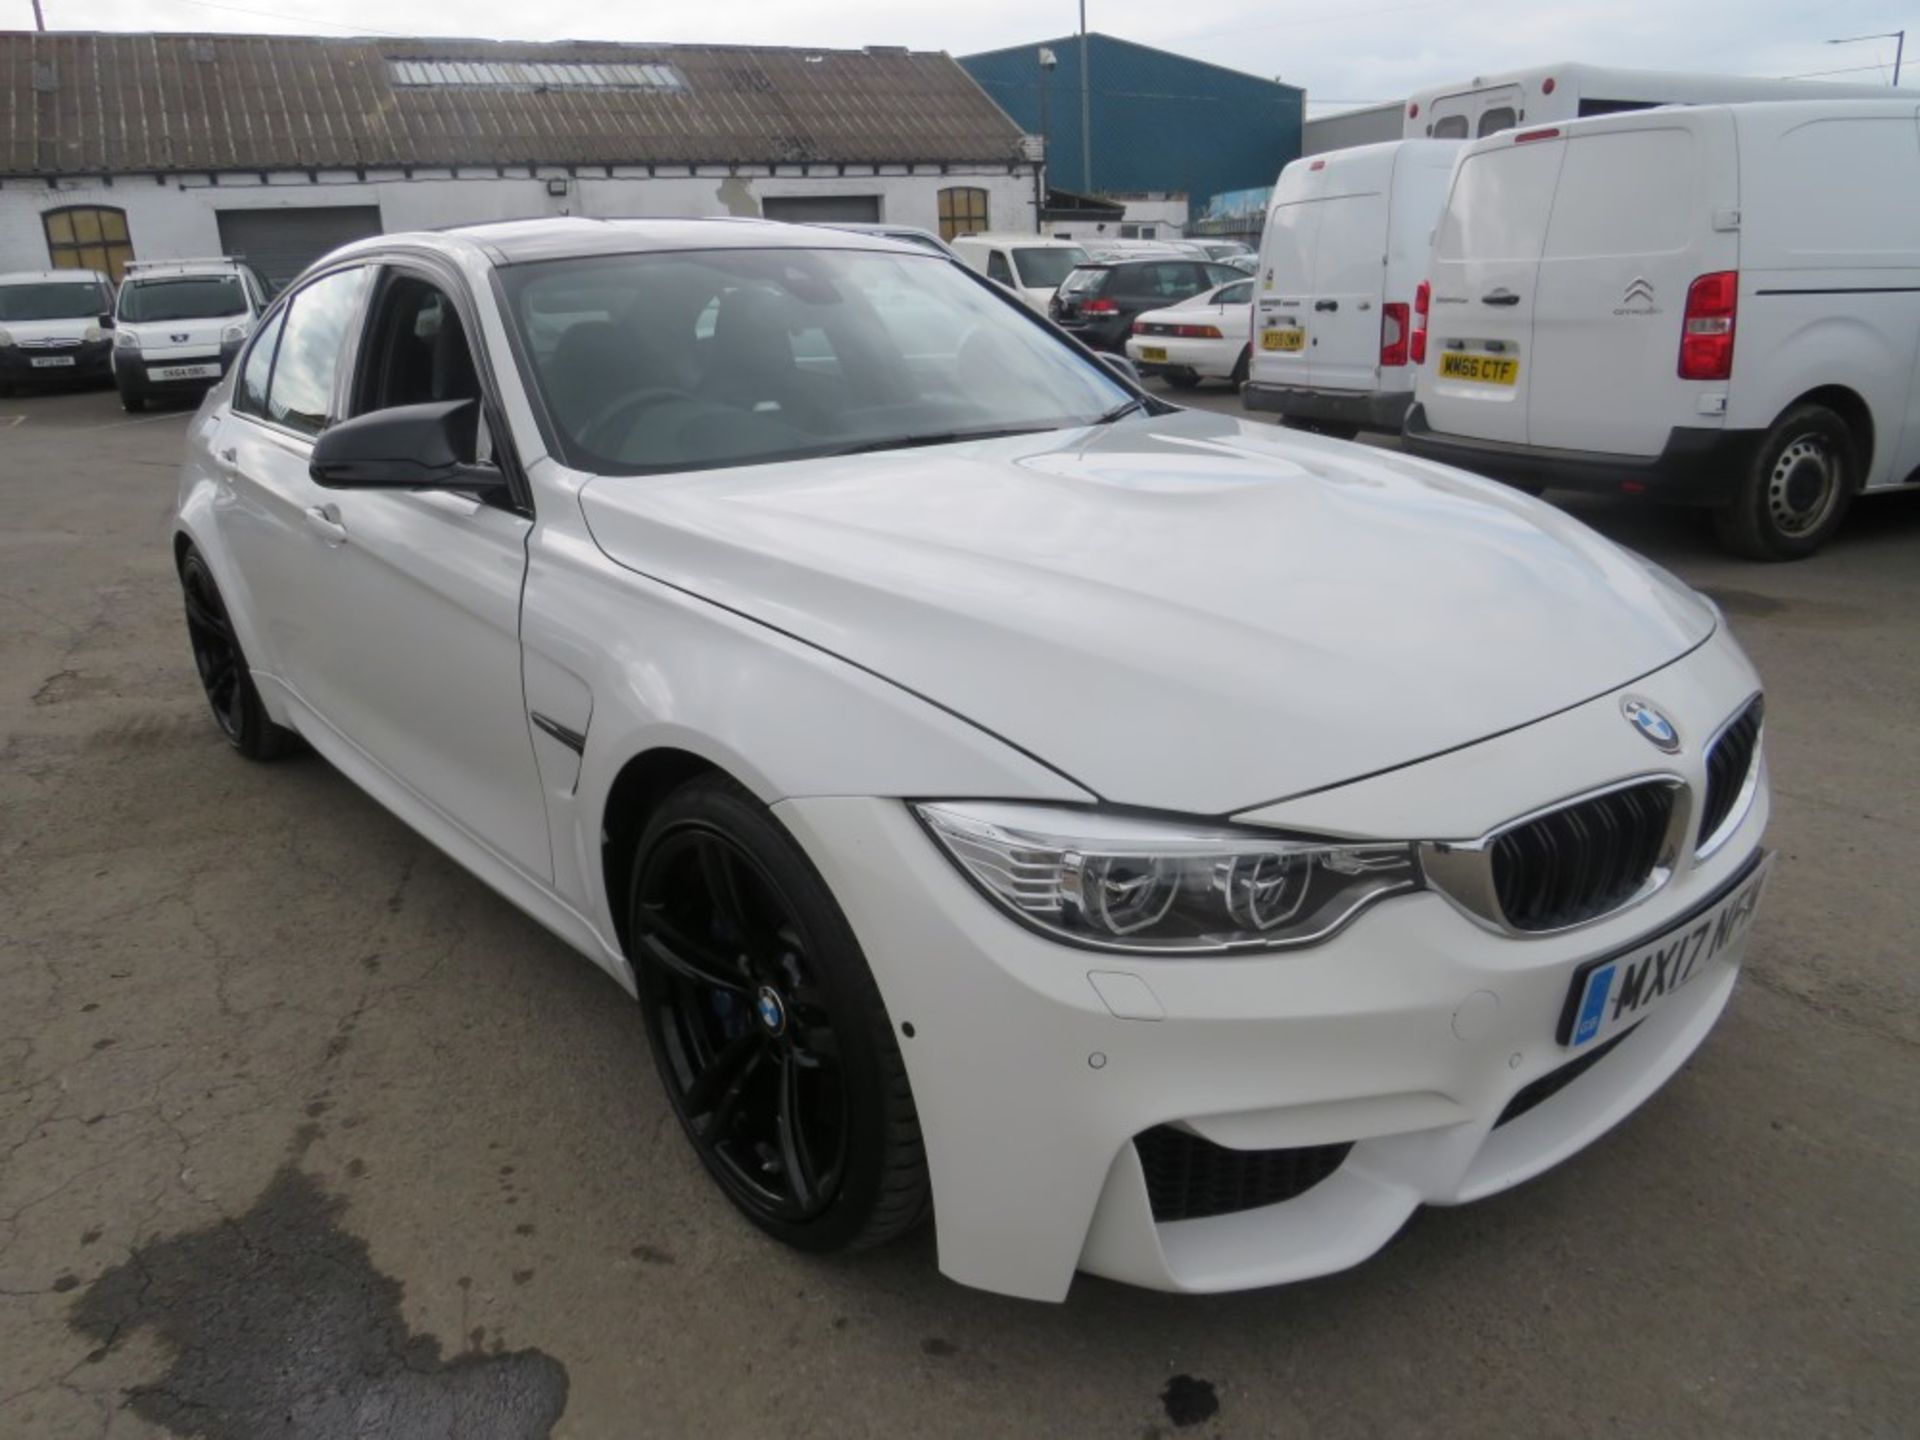 17 reg BMW M3 - IMPORT (DAMAGE REPAIRED - NOT RECORDED ON HPI) MANUFACTURED 2017, 1ST REG IN UK 08/